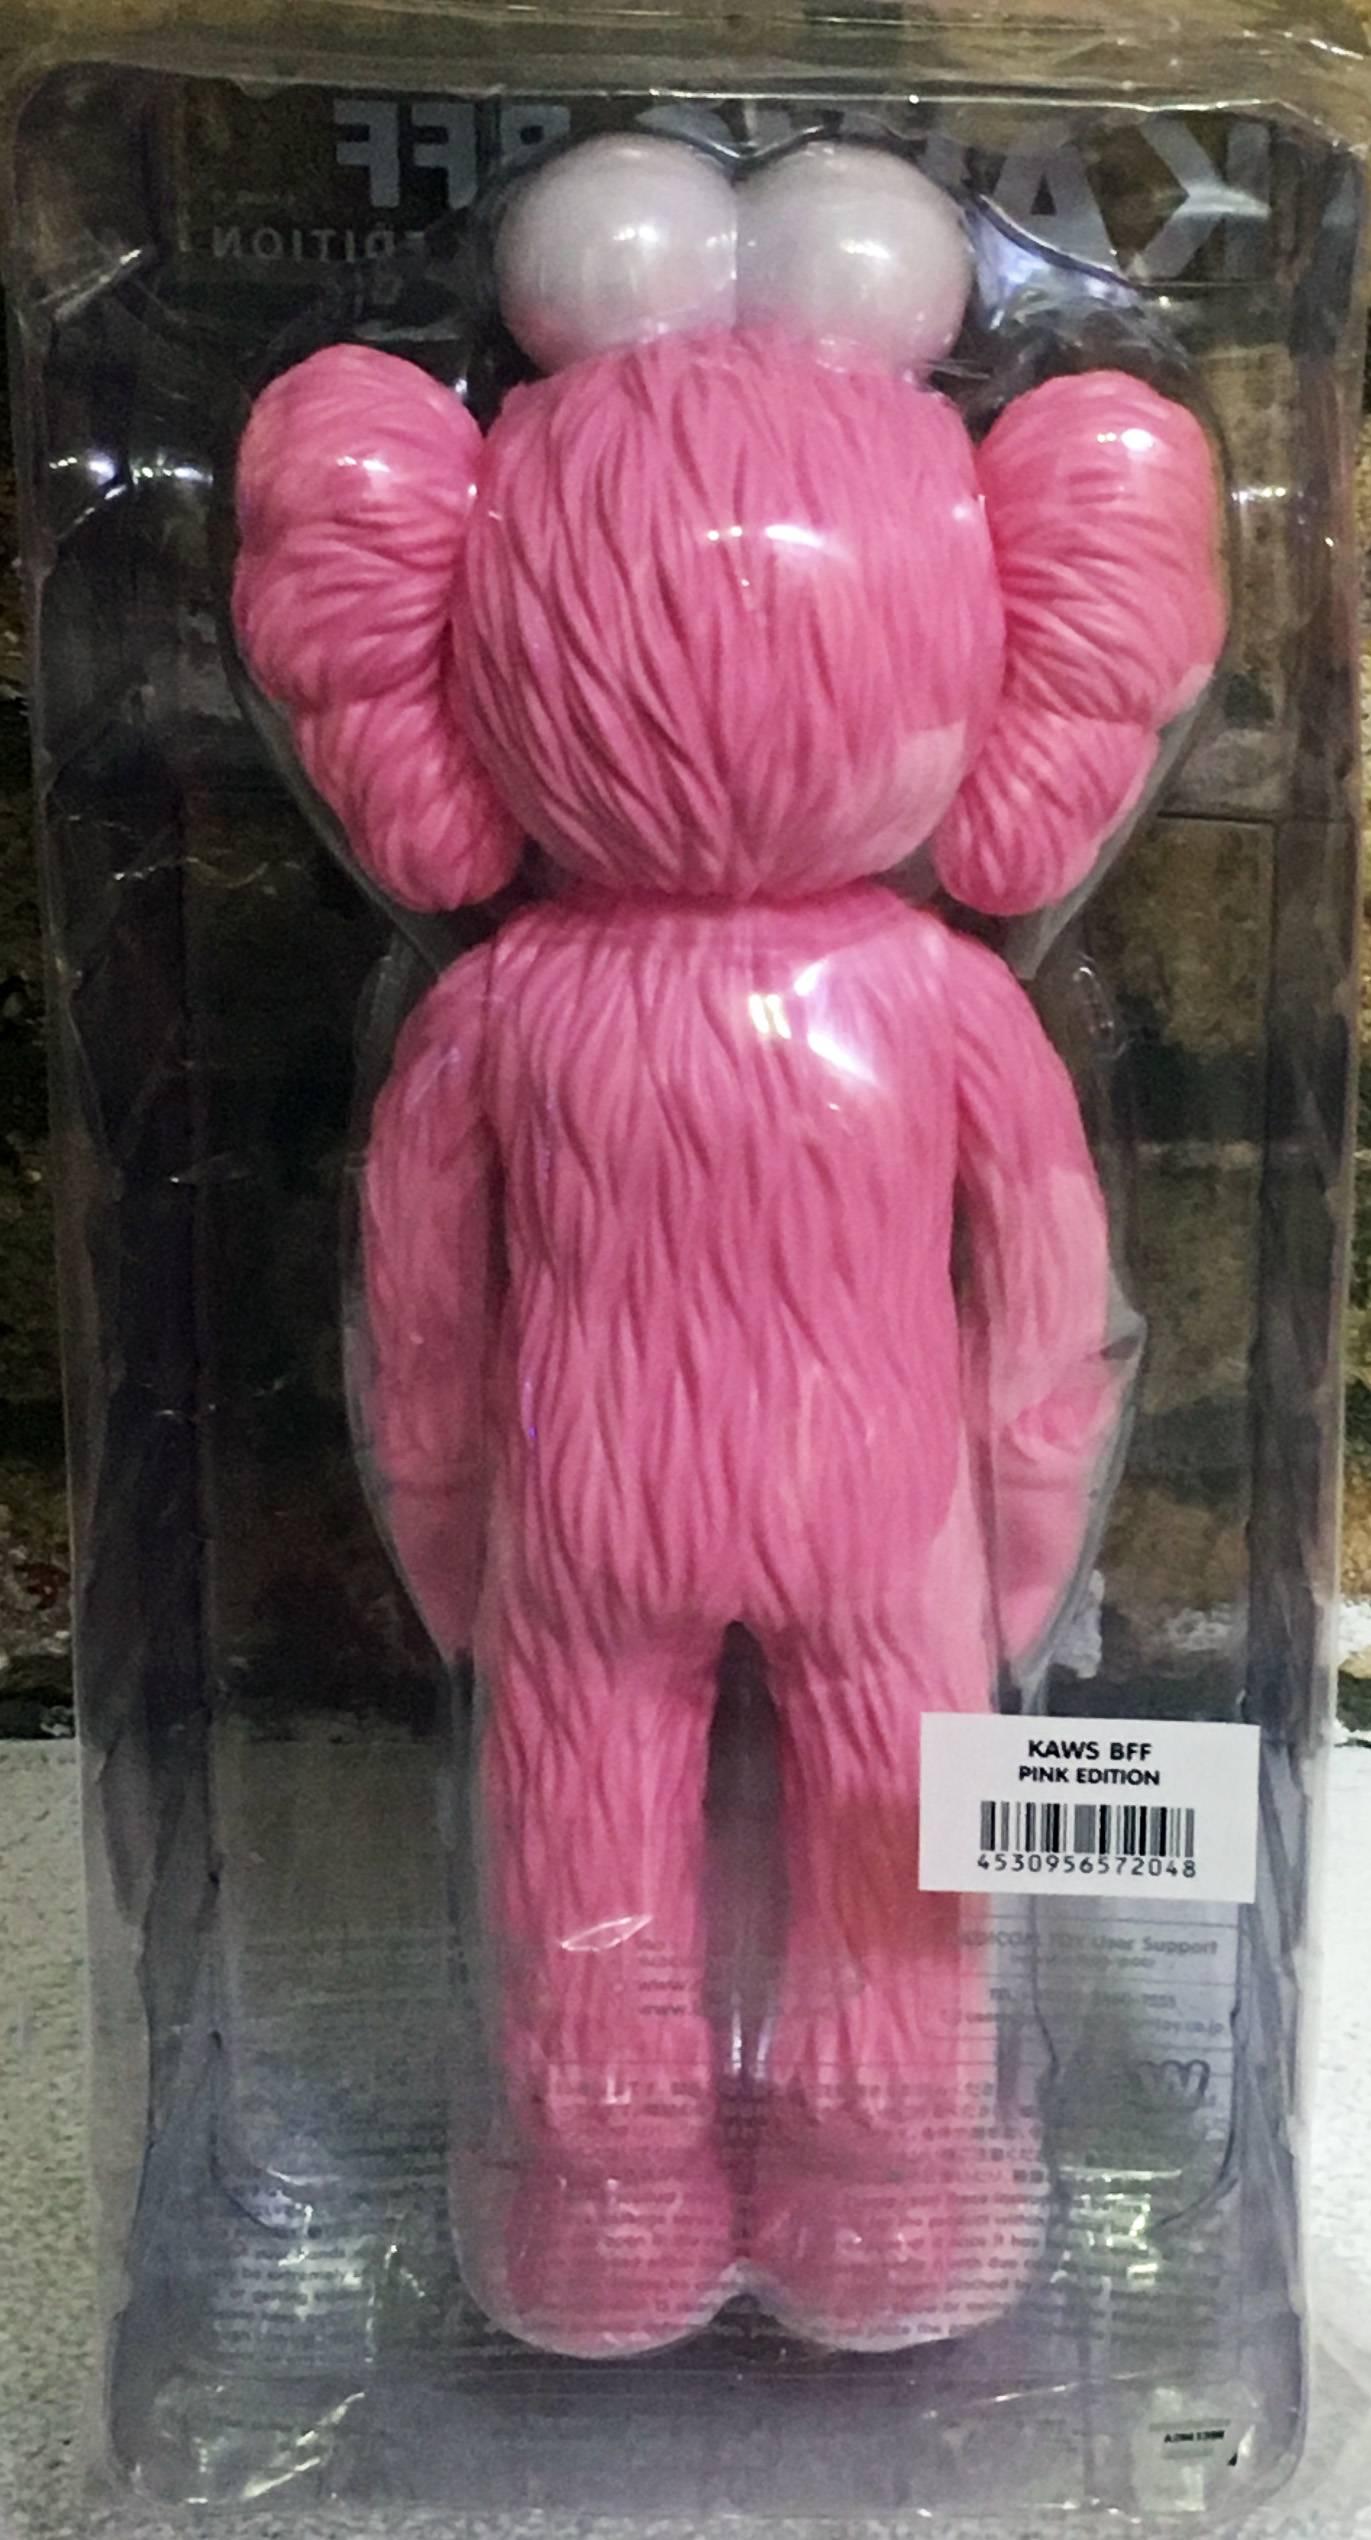 Rare KAWS BFF Pink new, unopened in its original packaging. 
A well-received work and variation of Kaws' large scale BFF sculpture is in Los Angeles's Playa Vista neighborhood Completely sold out; quite rare in this color. 

Medium: Vinyl & Cast